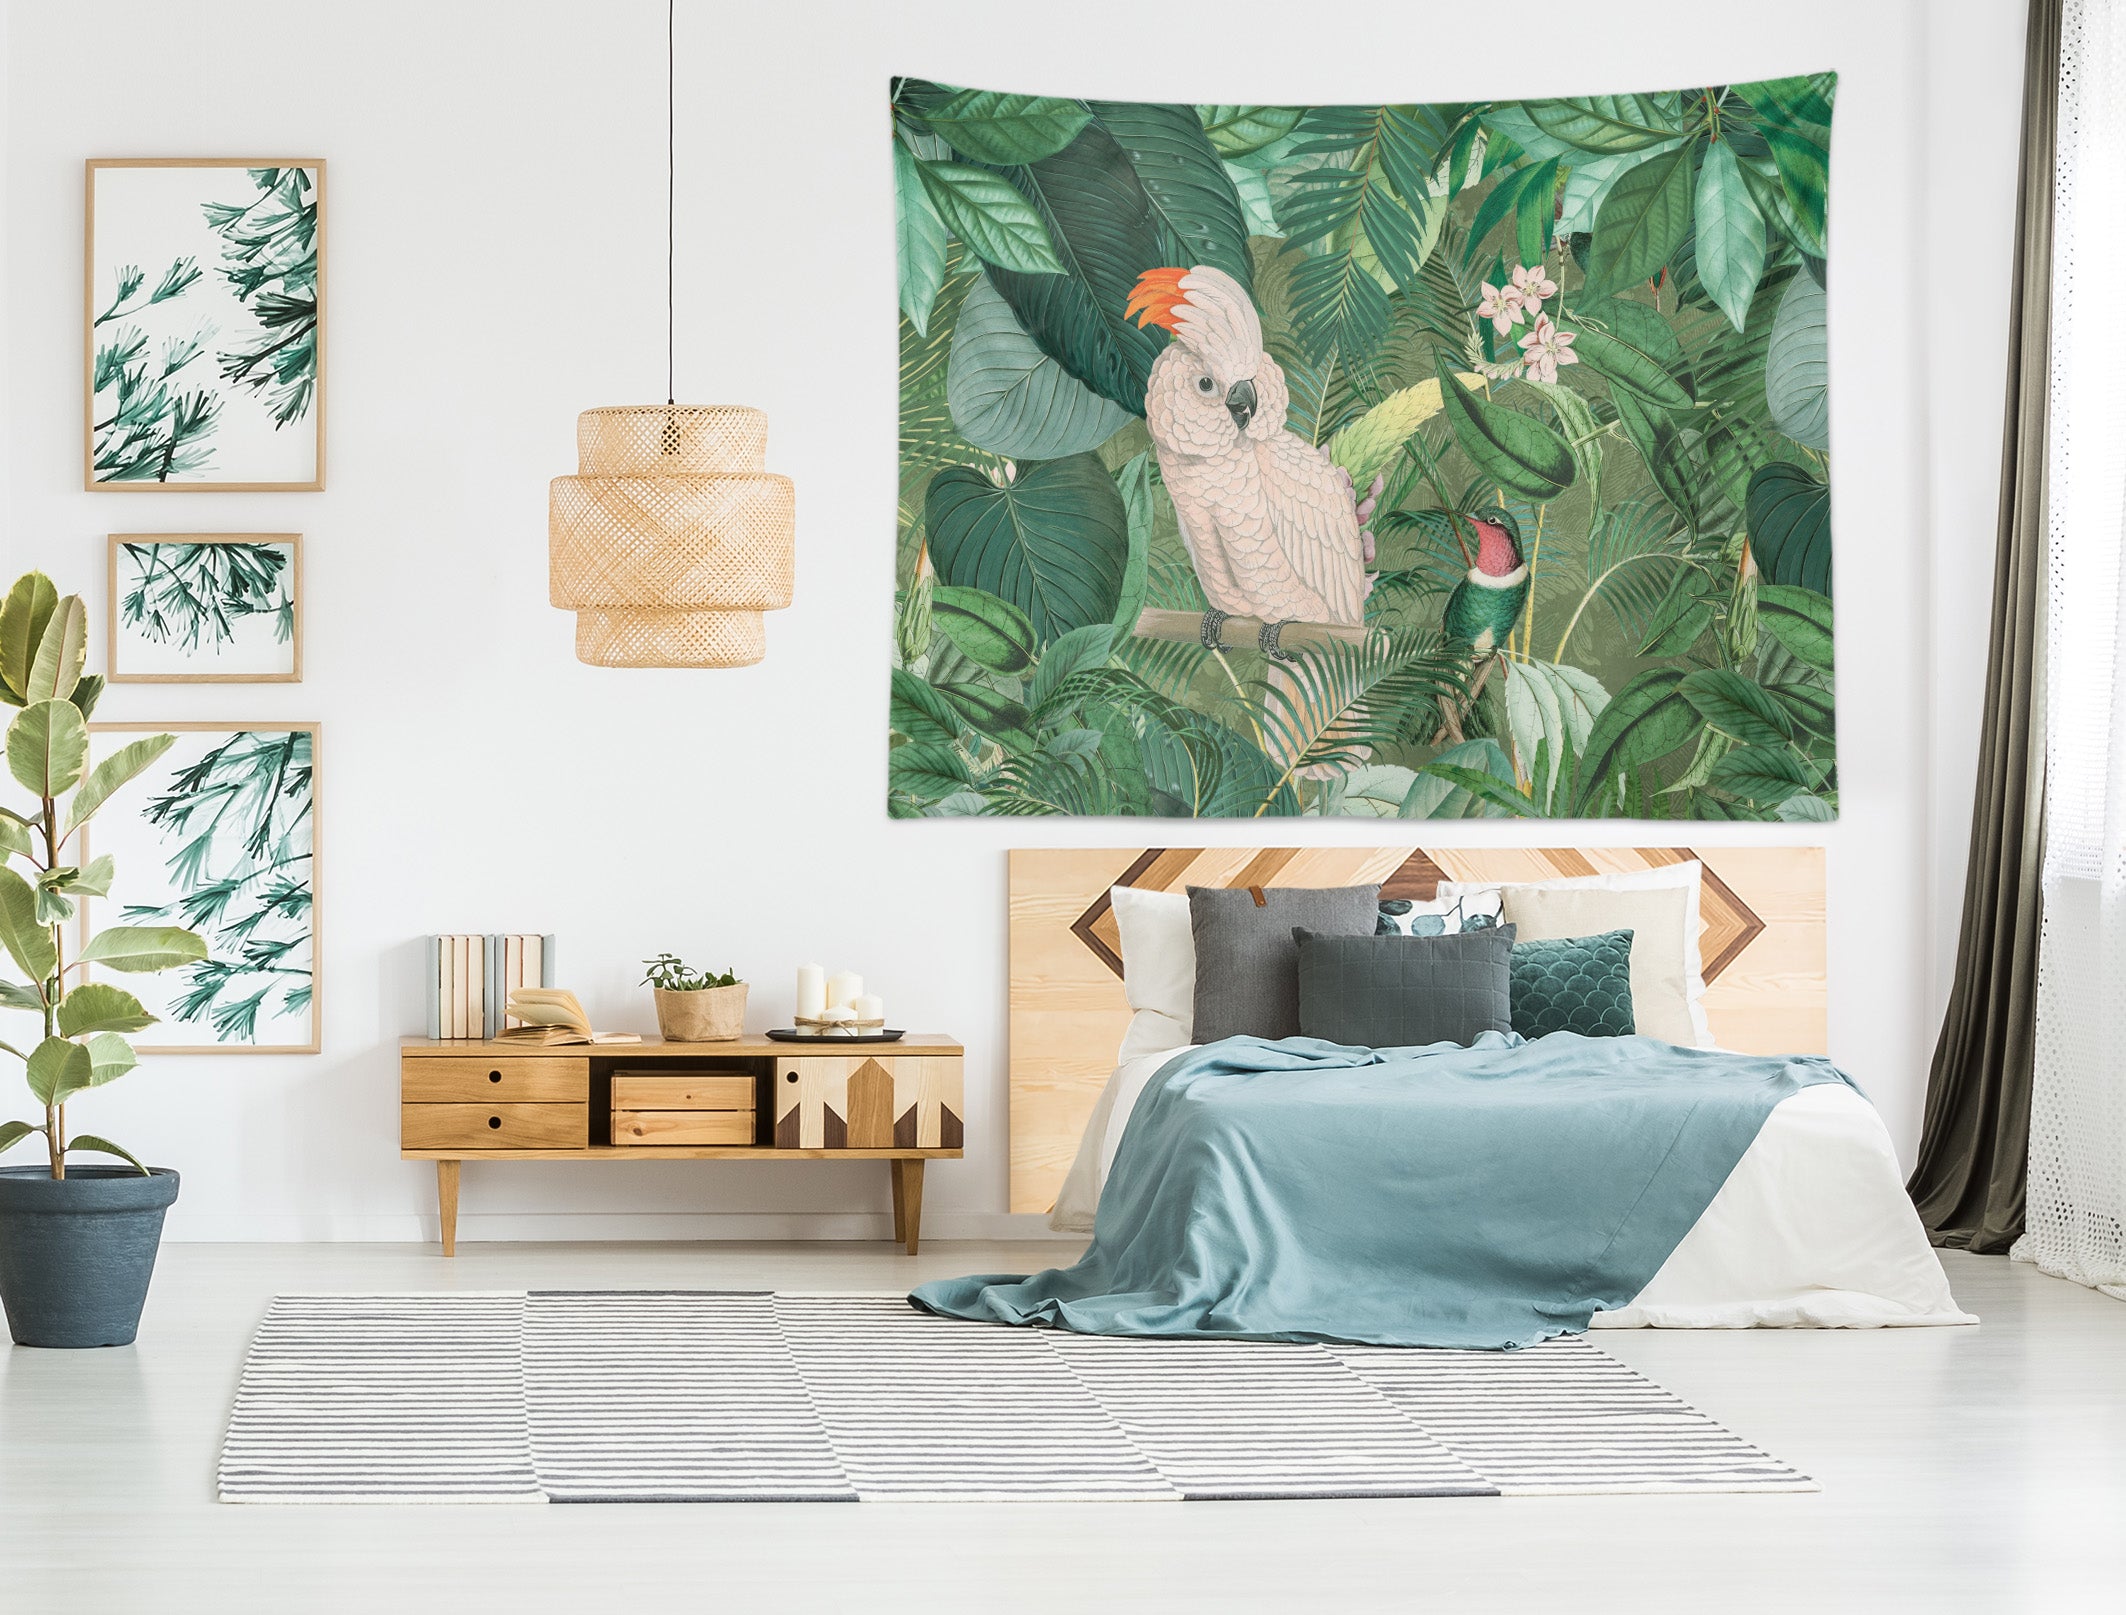 3D Parrot Grove 11854 Andrea haase Tapestry Hanging Cloth Hang